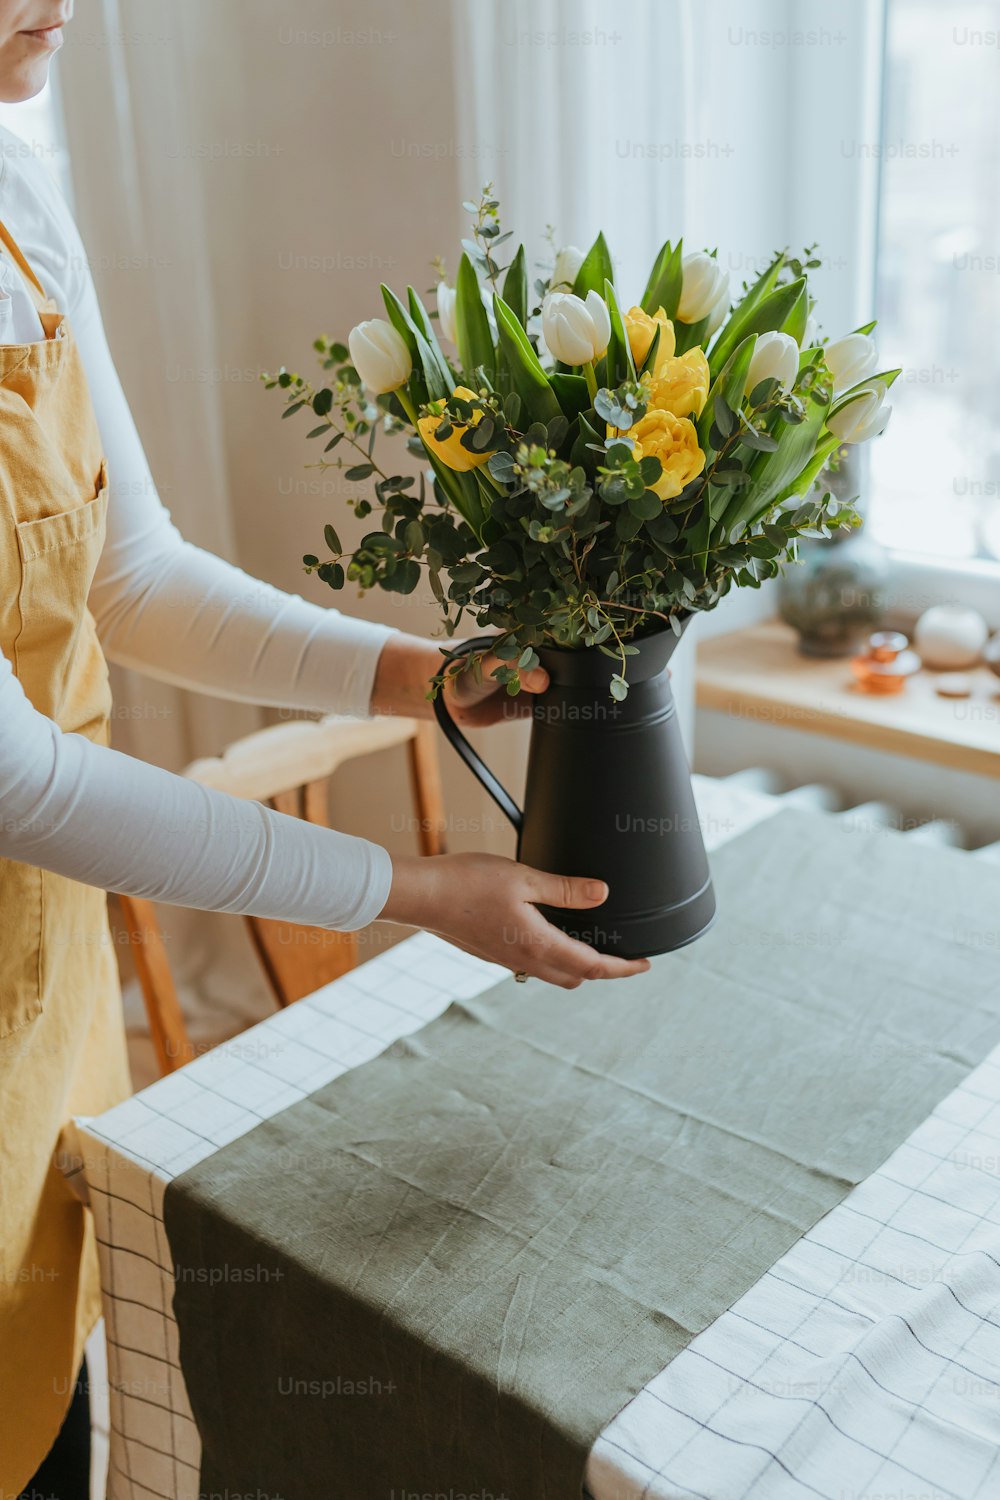 a woman is holding a vase with flowers in it